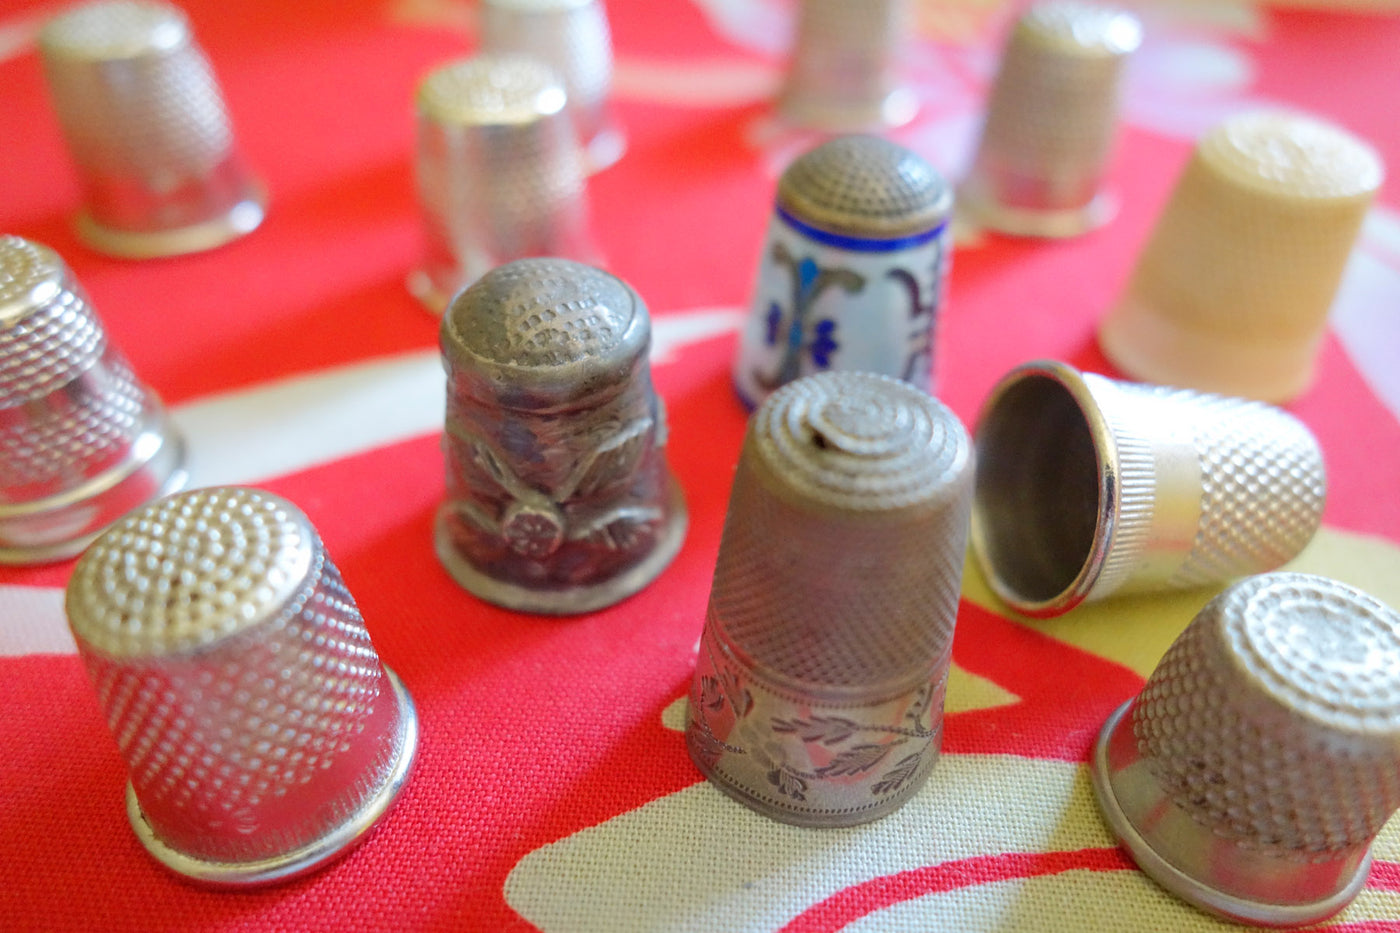 Sewing Thimble, Thimbles for Hand Sewing, Metal Thimbles for Hand Sewing,  Sewing Thimble Rings and Leather Coin Thimble for Needlework, Hand